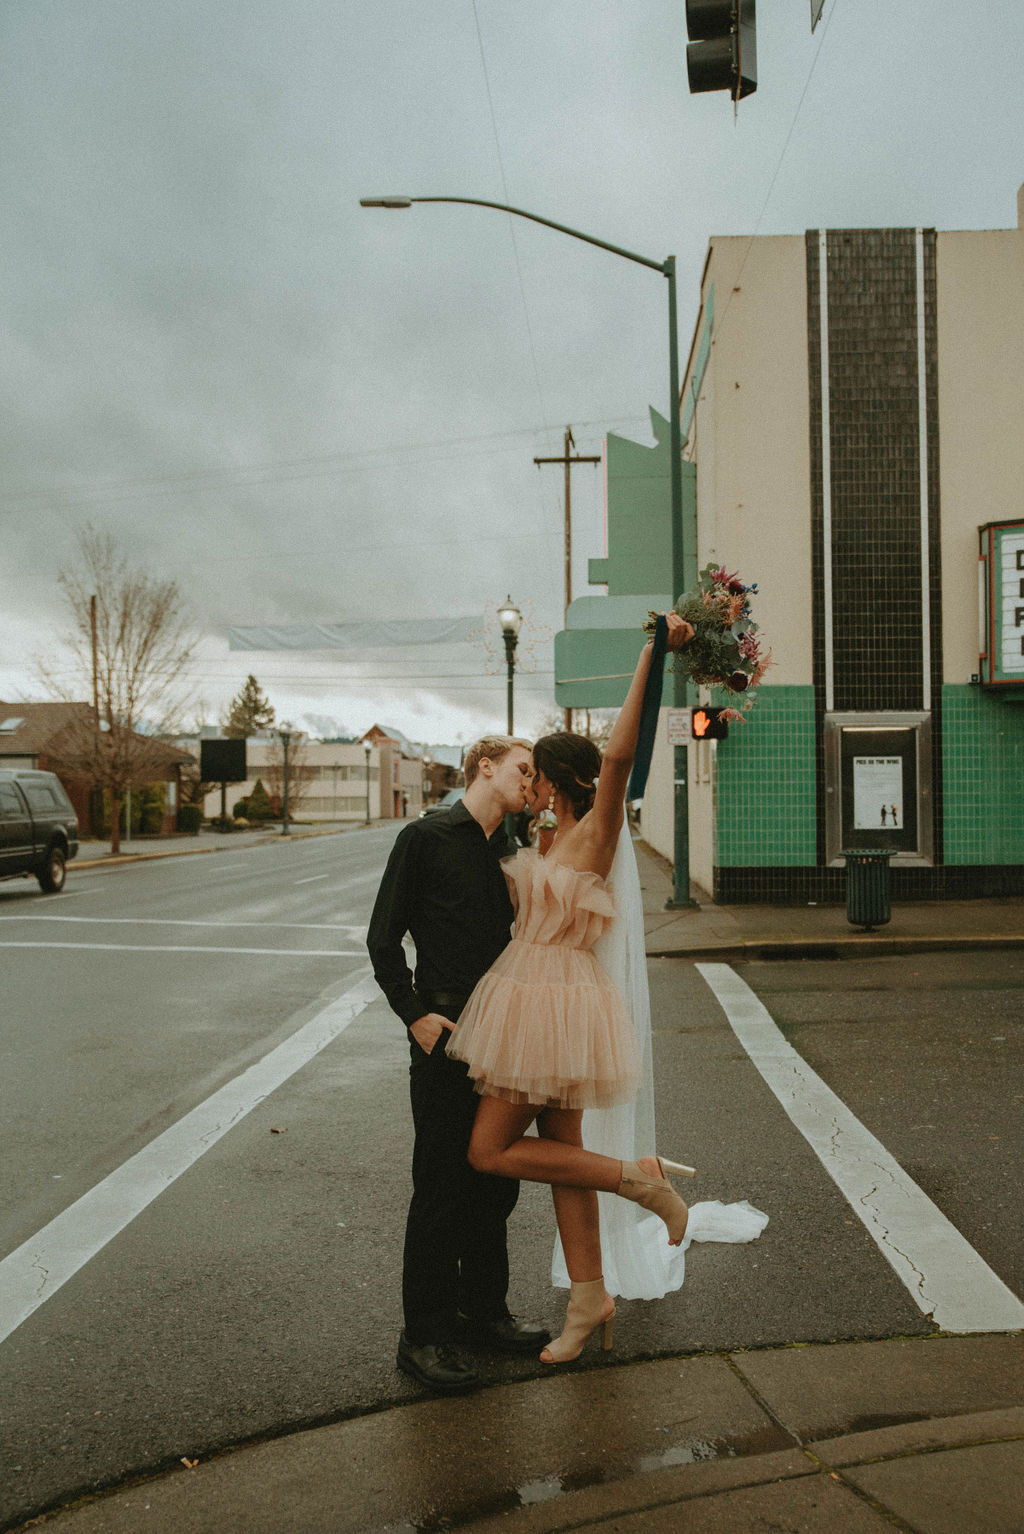 How To Plan Your Elopement In Oregon